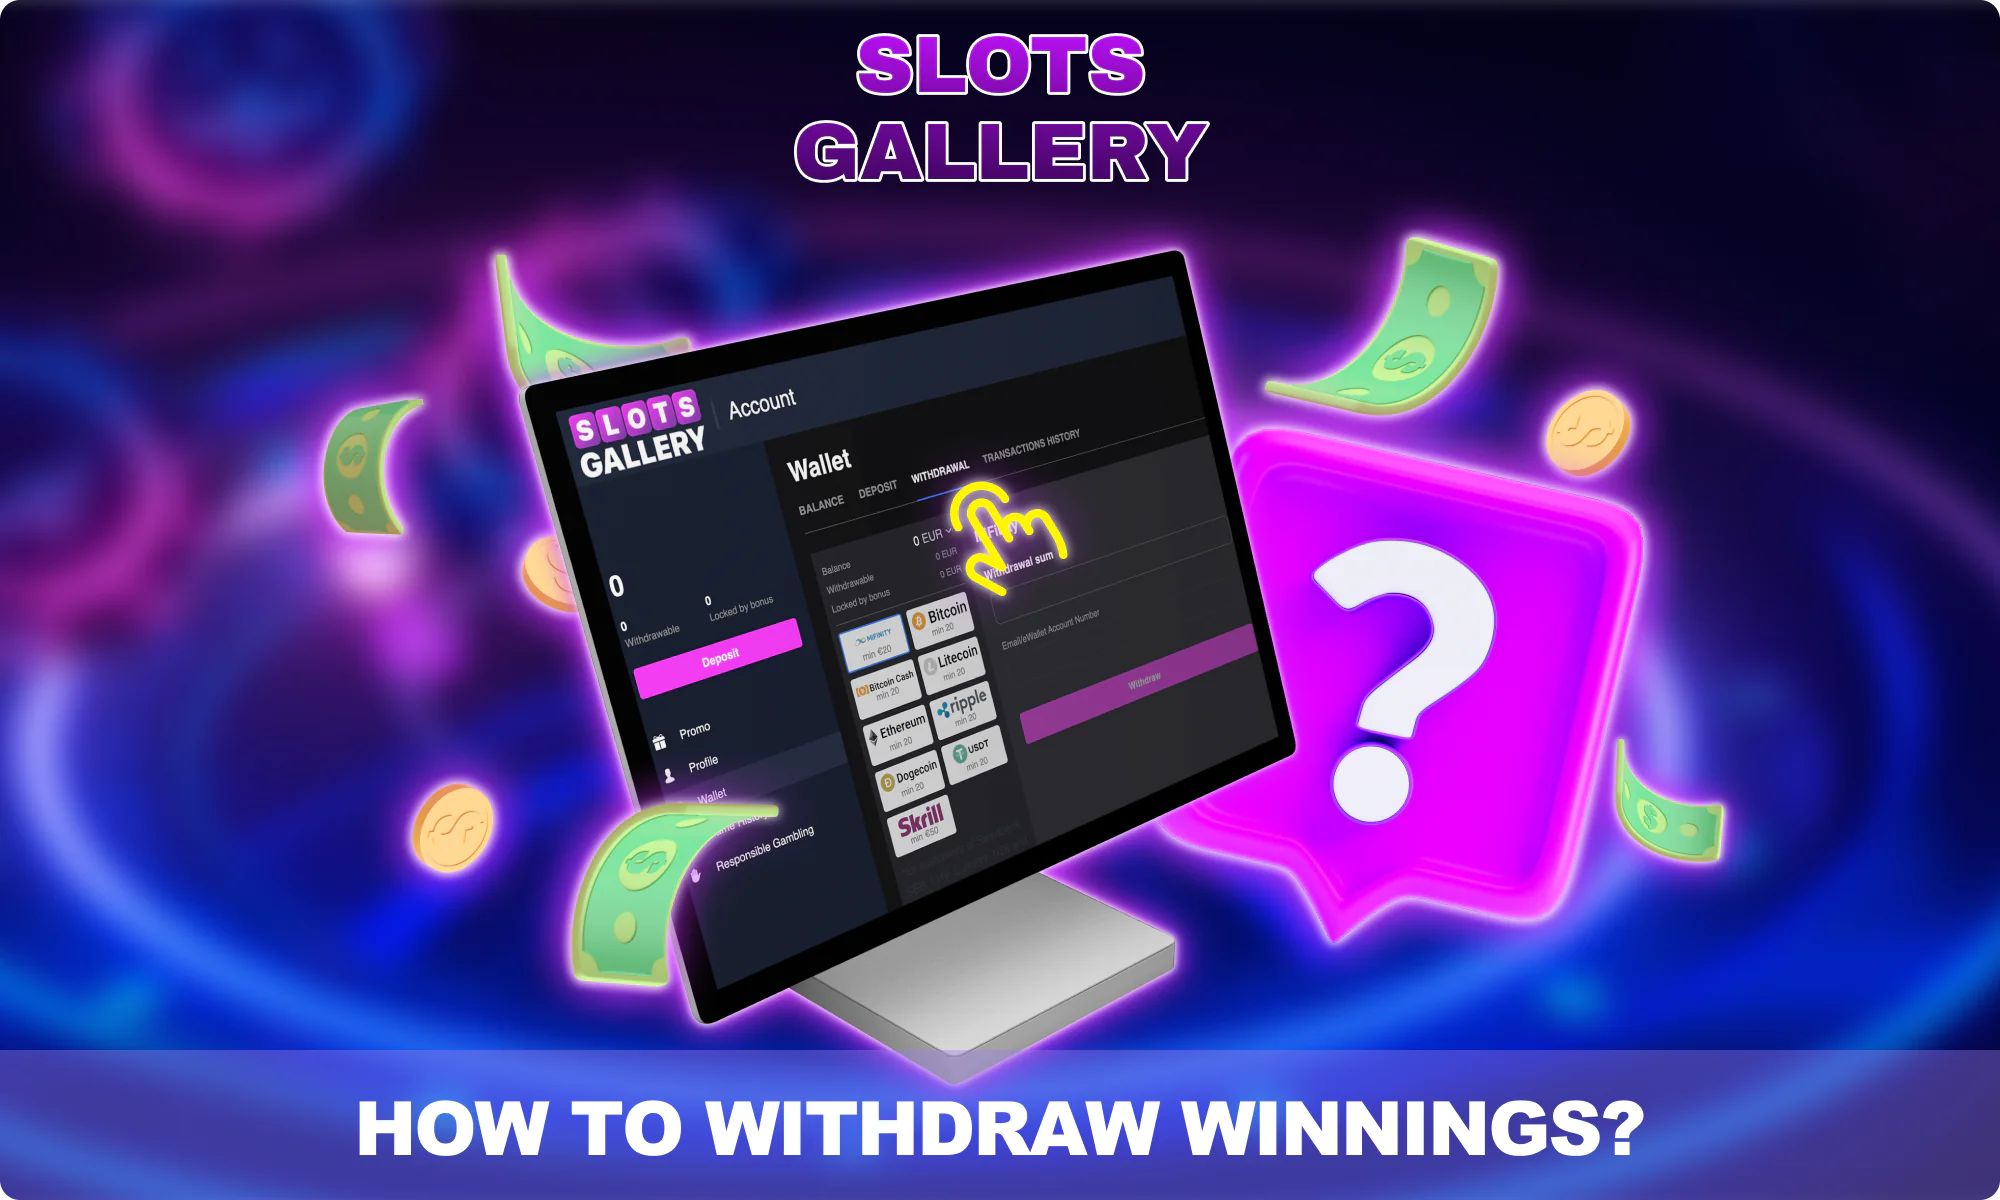 How Slots Gallery players can withdraw their winnings